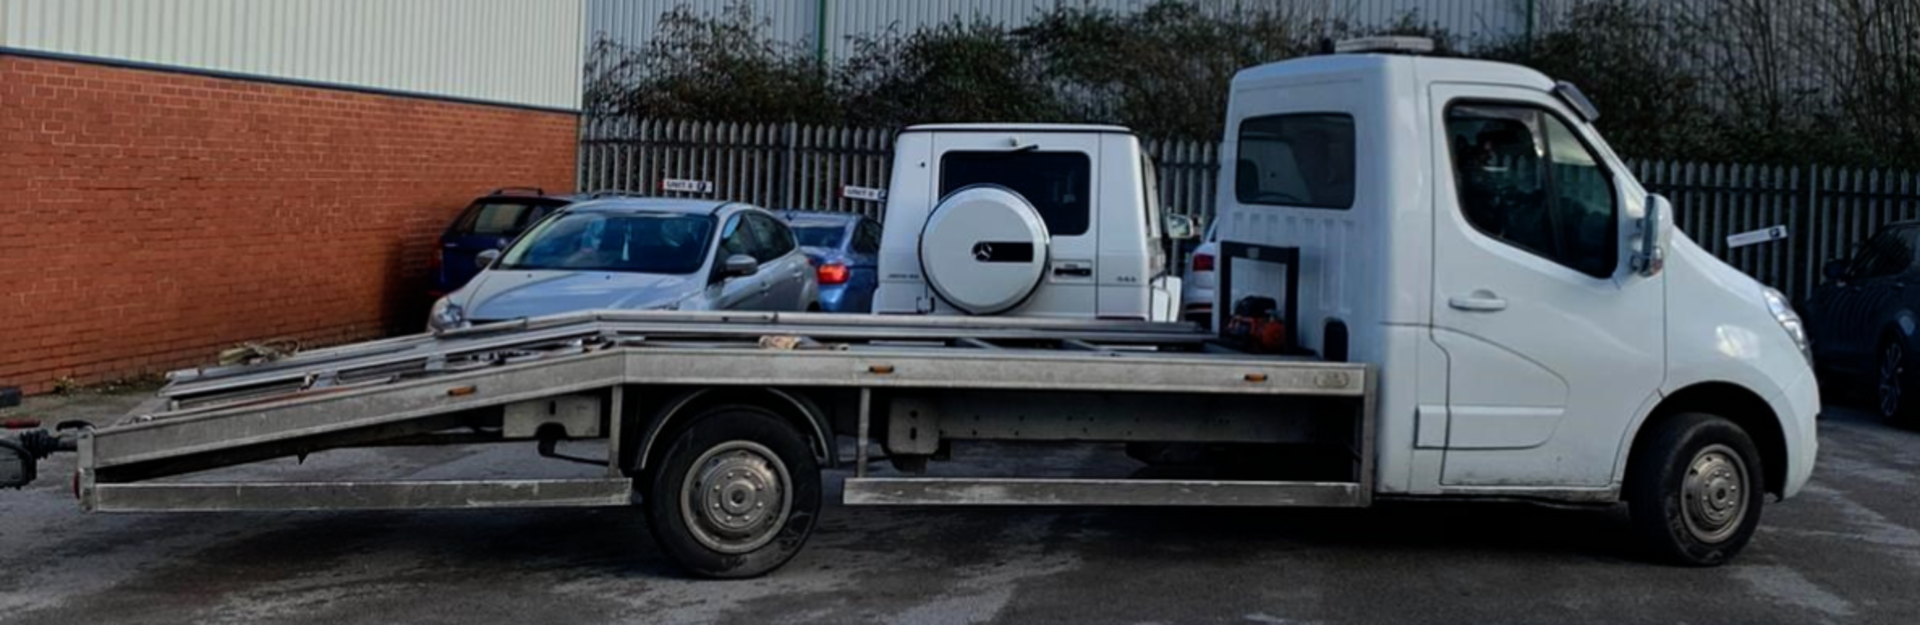 2012 VAUXHALL MOVANO RECOVERY PLUS VAT - Image 2 of 10